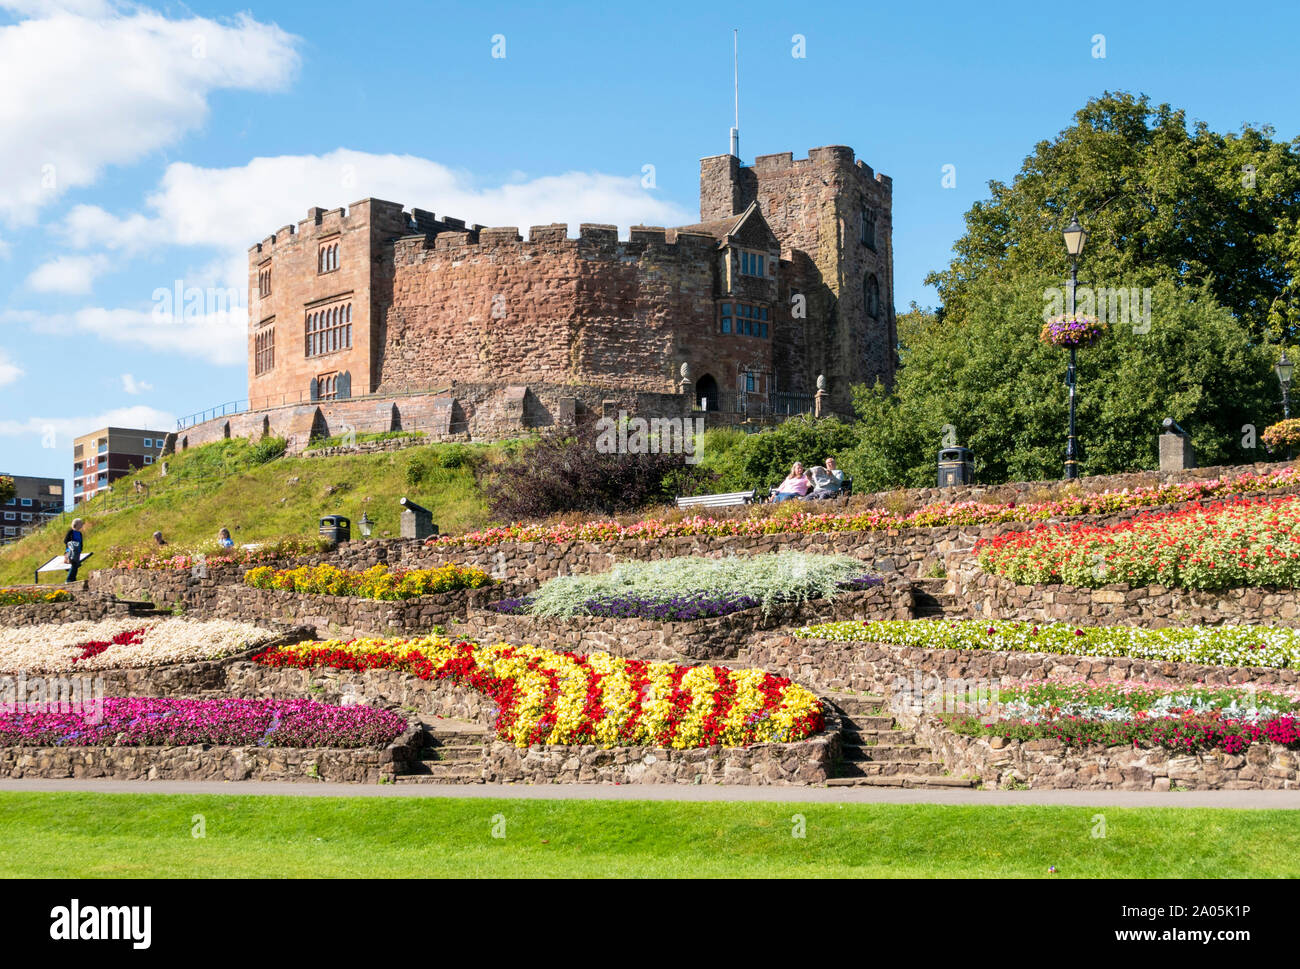 Tamworth castle grounds town centre medieval castle Staffordshire England UK GB UK Europe Stock Photo